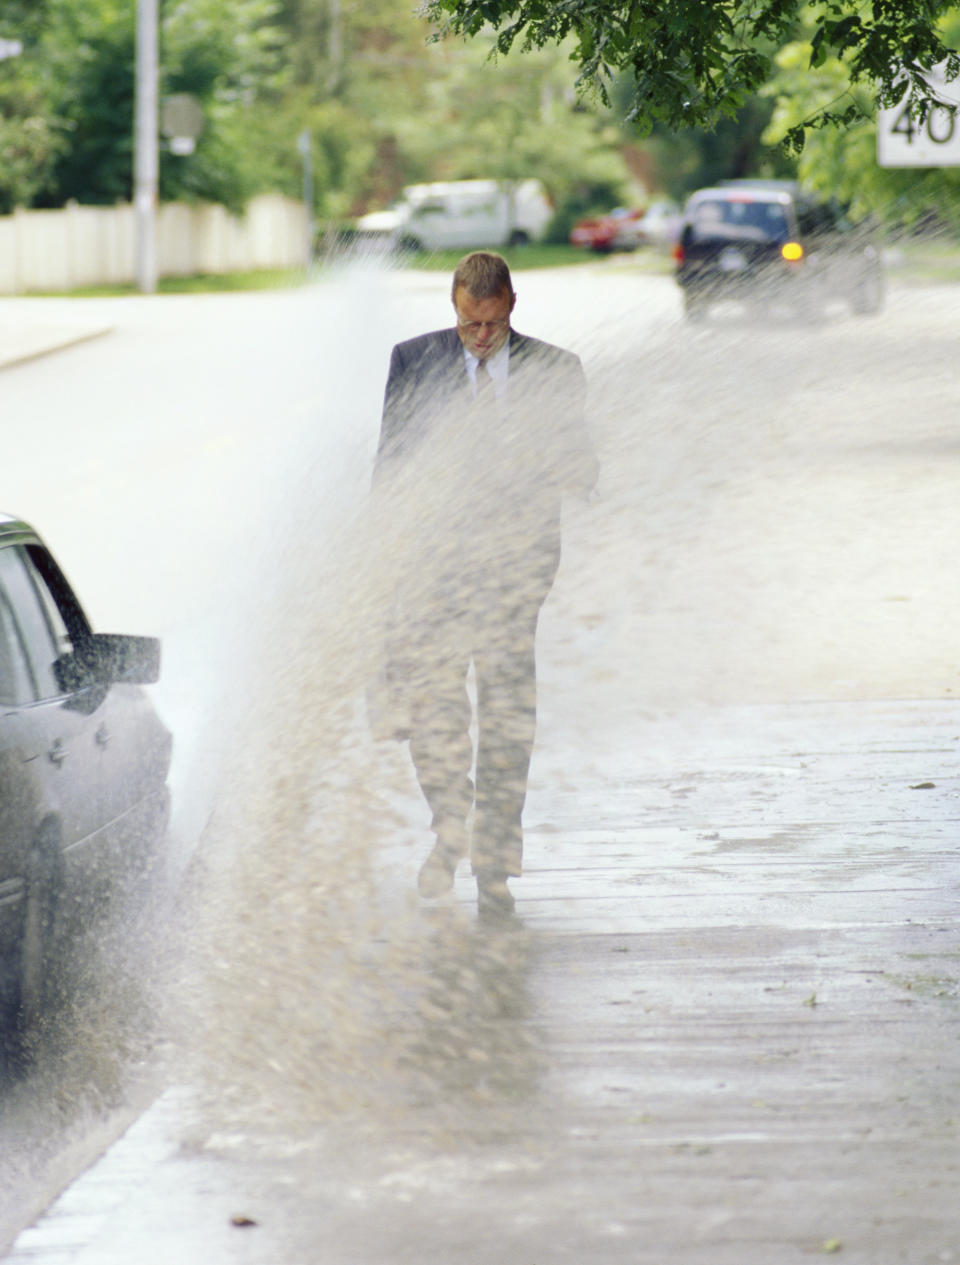 A man being splashed with mud by a passing car – an offence if you're in NSW and also splashing someone at a bus stop.